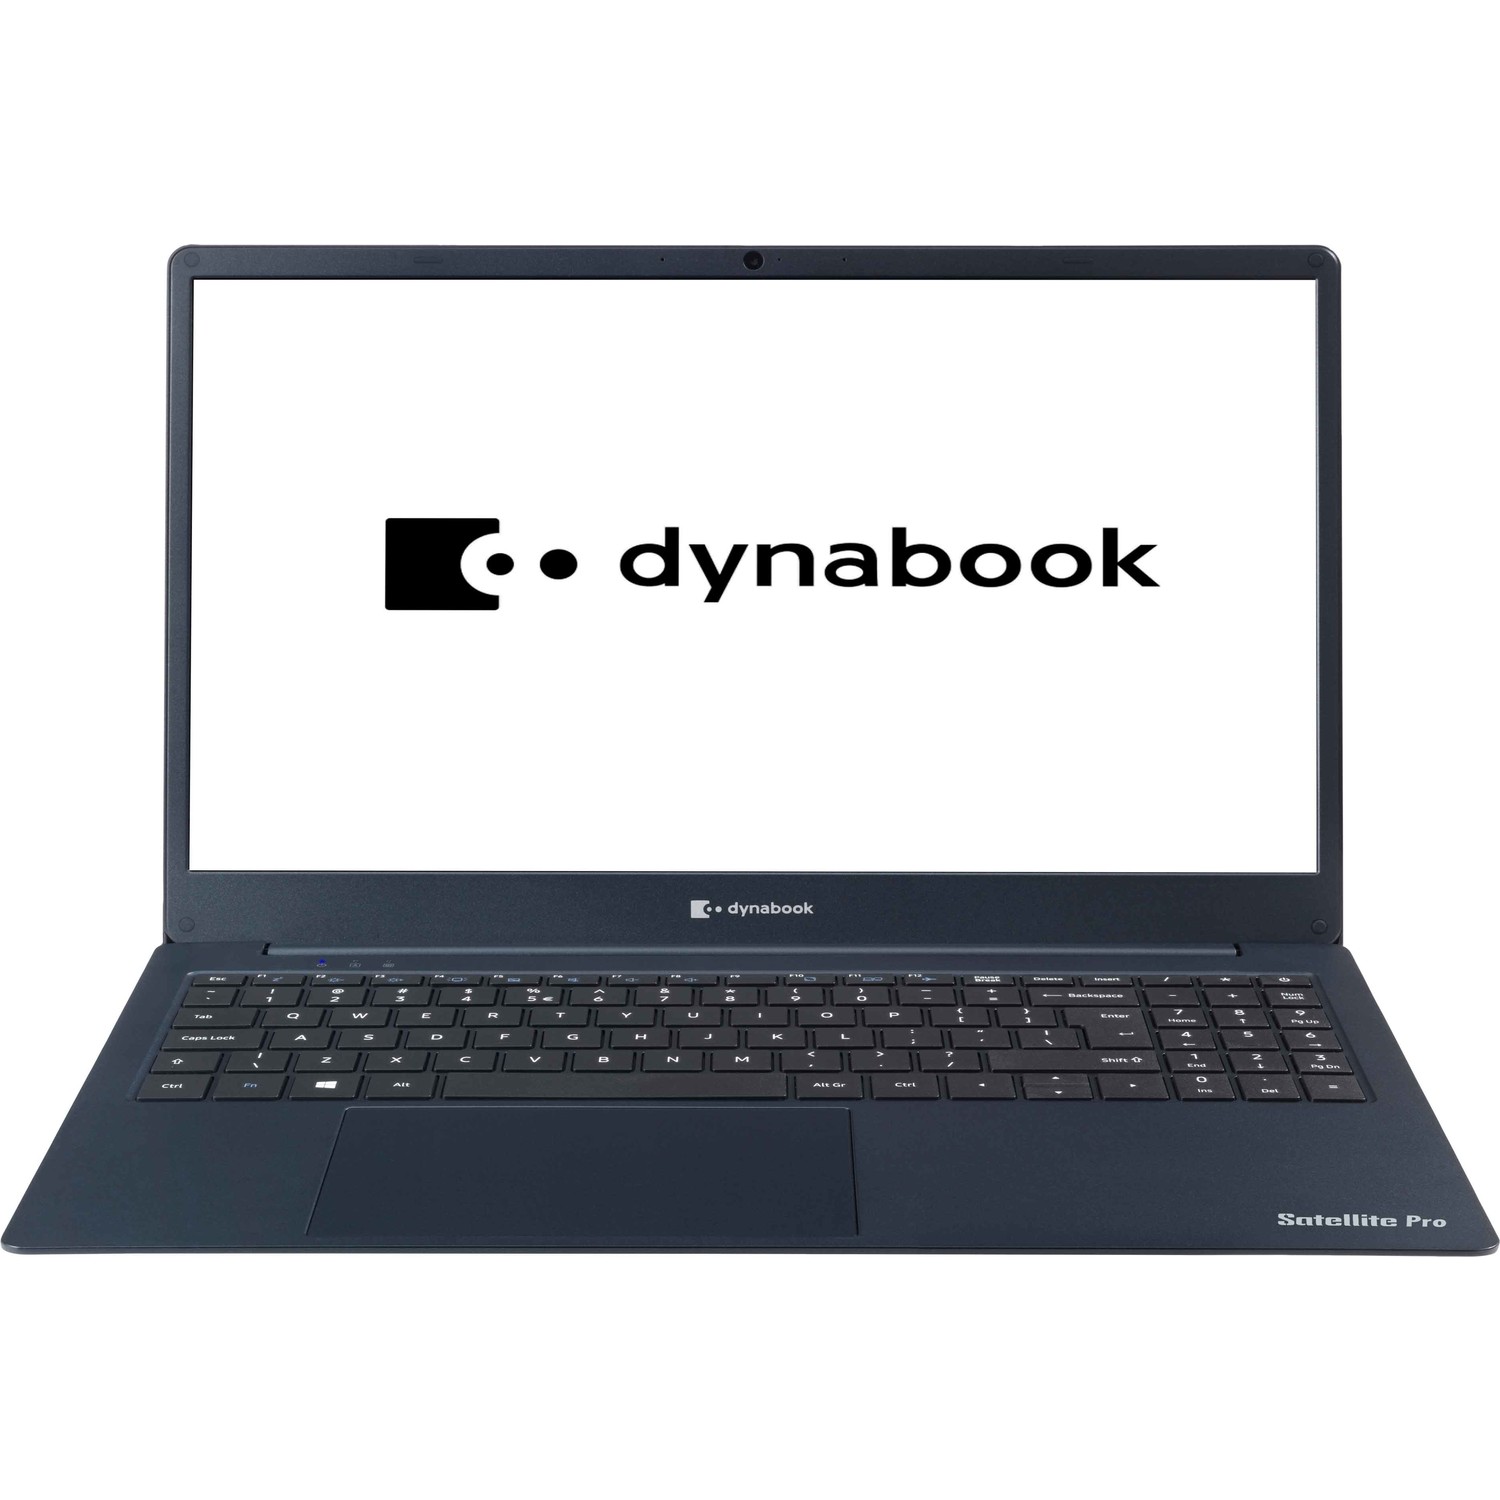 Dynabook%20Satellite%20Pro%20C50-H-112%20Intel%20Core%20i5%201035G1%208GB%20256GB%20SSD%20Freedos%2015.6%20FHD%20Notebook